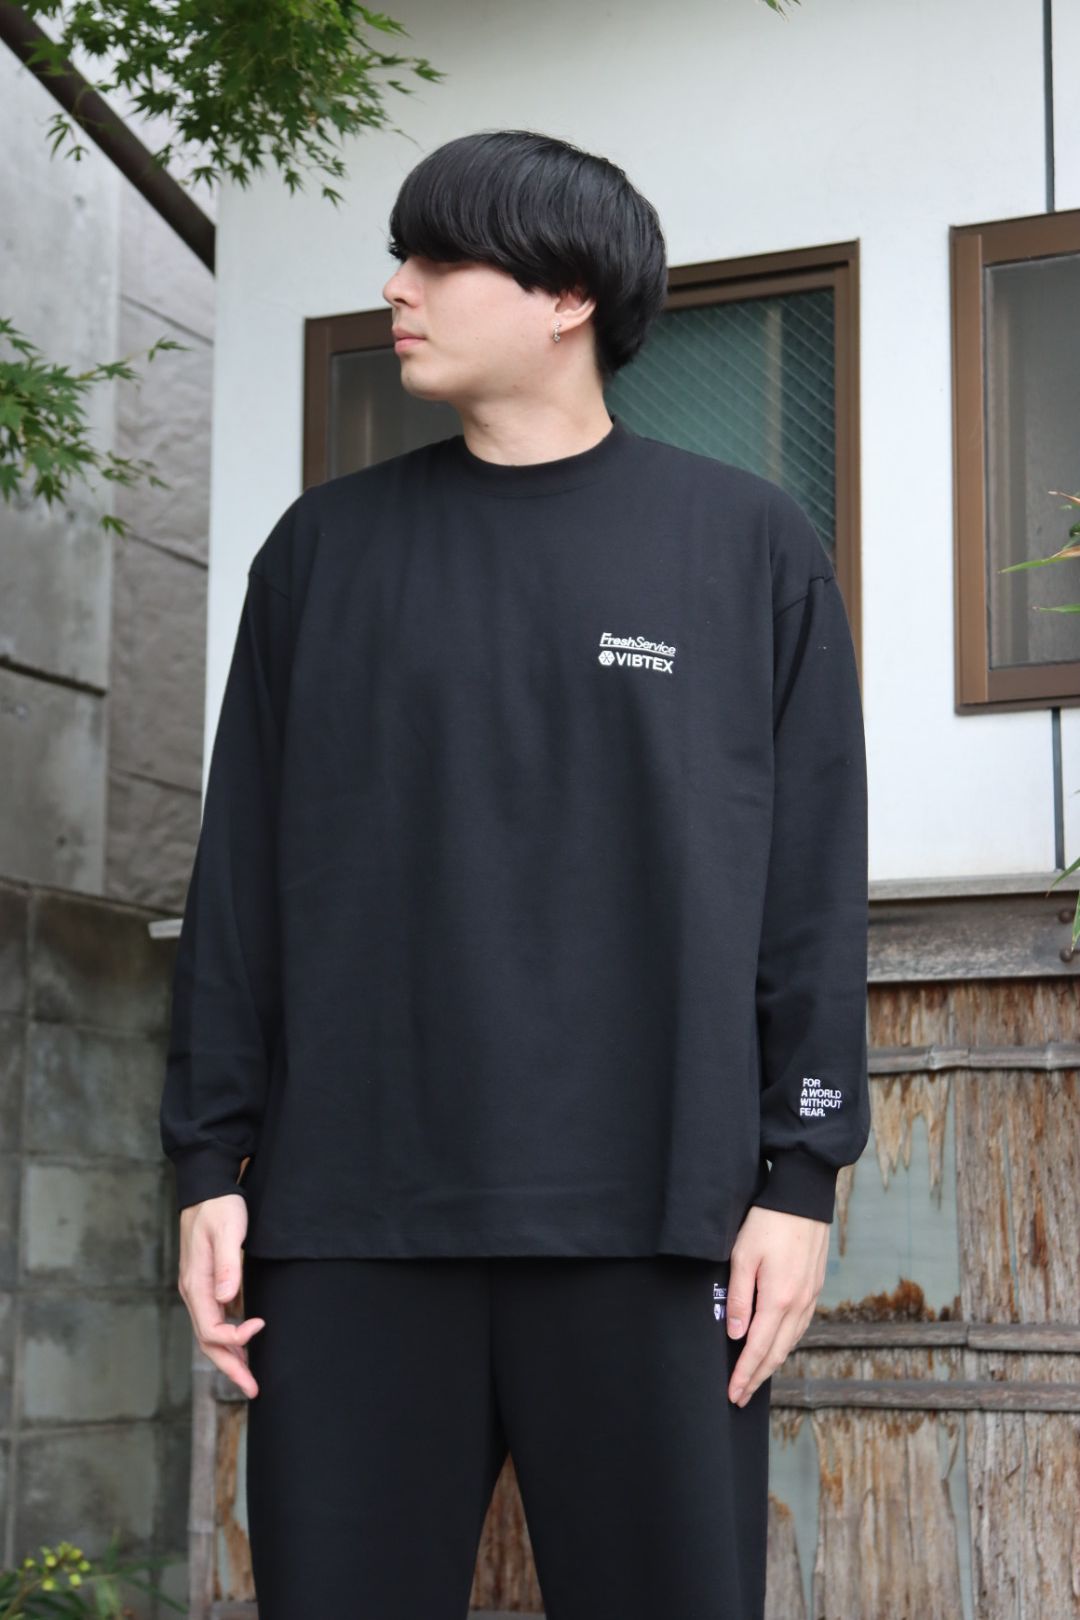 VIBTEX for FreshService “L/S CREW NECK TEE” style.2022.10.21 